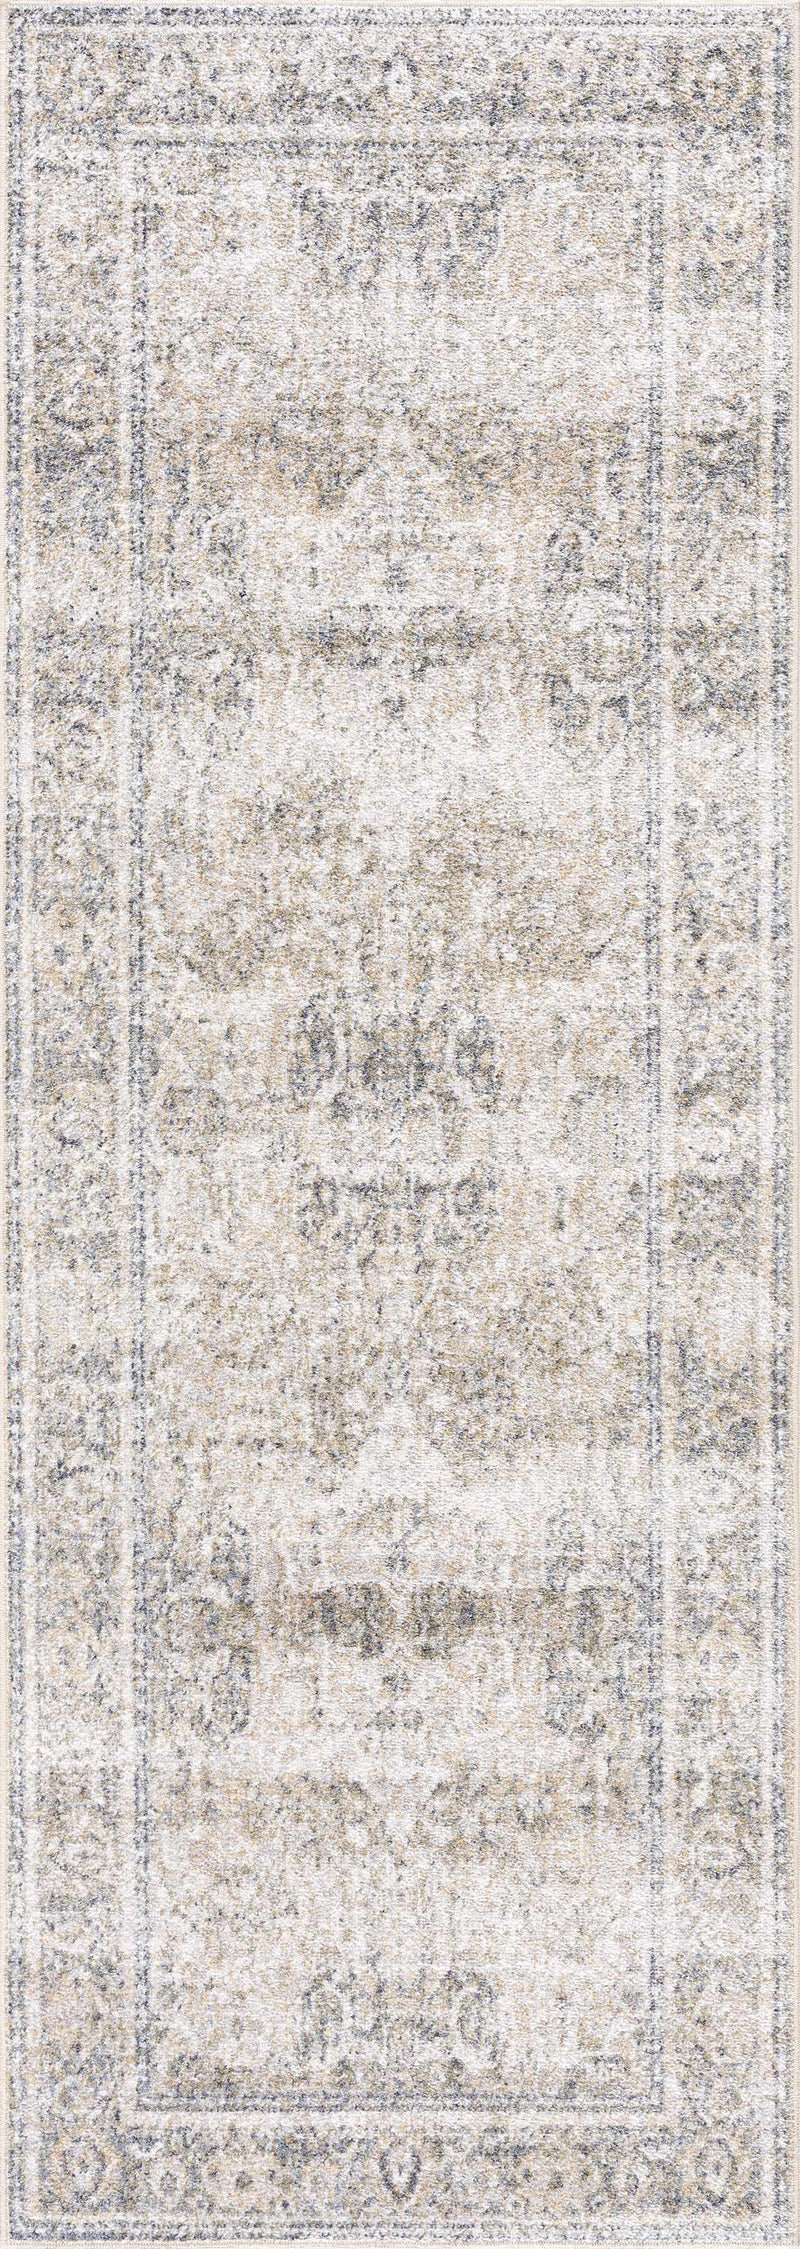 Boutique Rugs - Arias Cream & Blue Washable Area Rug Rugs Boutique Rugs 2'7" x 7'3" Runner 